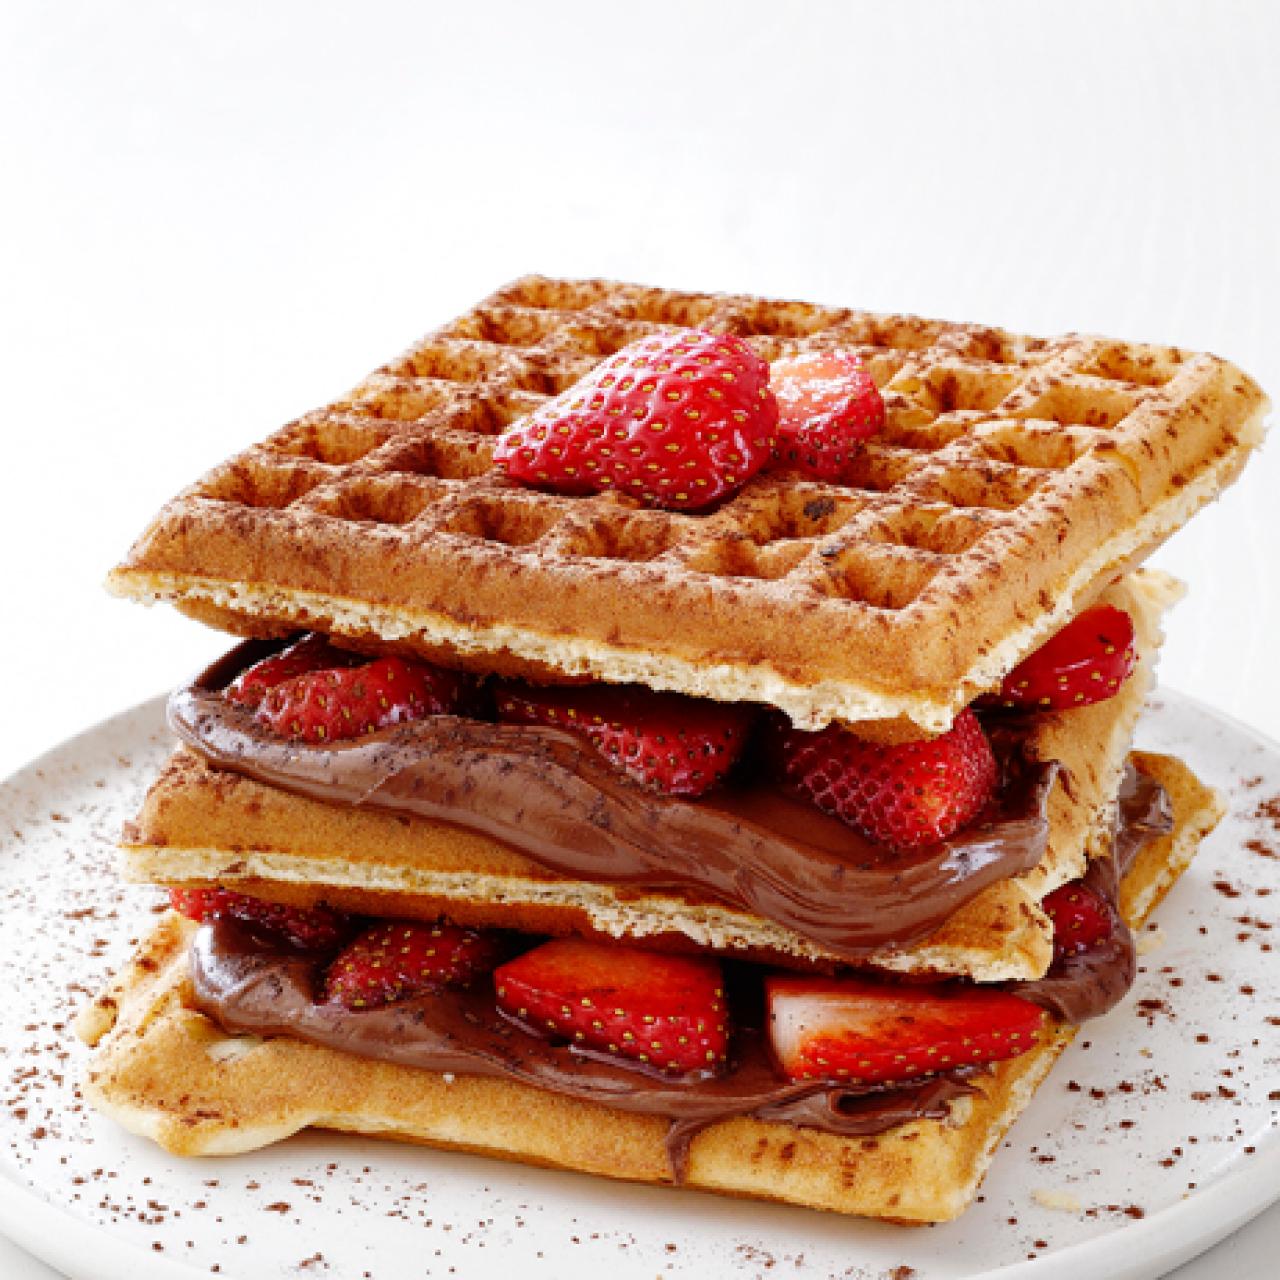 Check Out The Newest & Yummiest Waffle Cake At This Outlet! | LBB